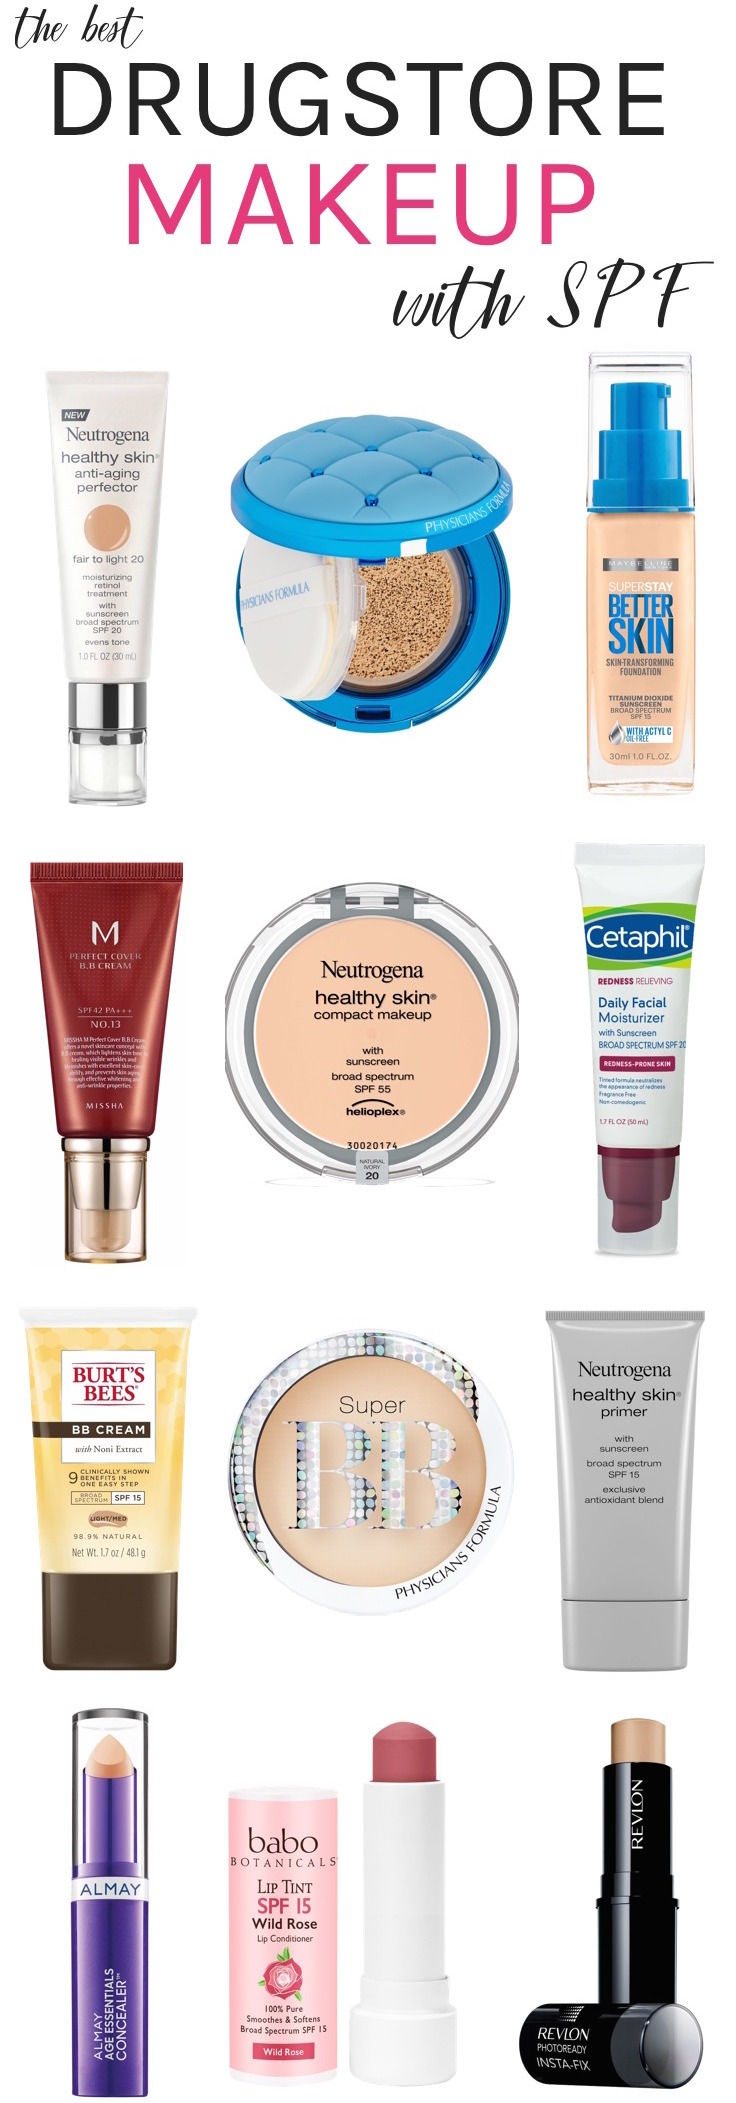 Best Drugstore makeup with SPF | Whether you’re trying to hide dark spots or boost a dull complexion, here are 15 multitasking drugstore makeup must-haves that beautify your complexion while serving up extra SPF! Click through to see the full list!